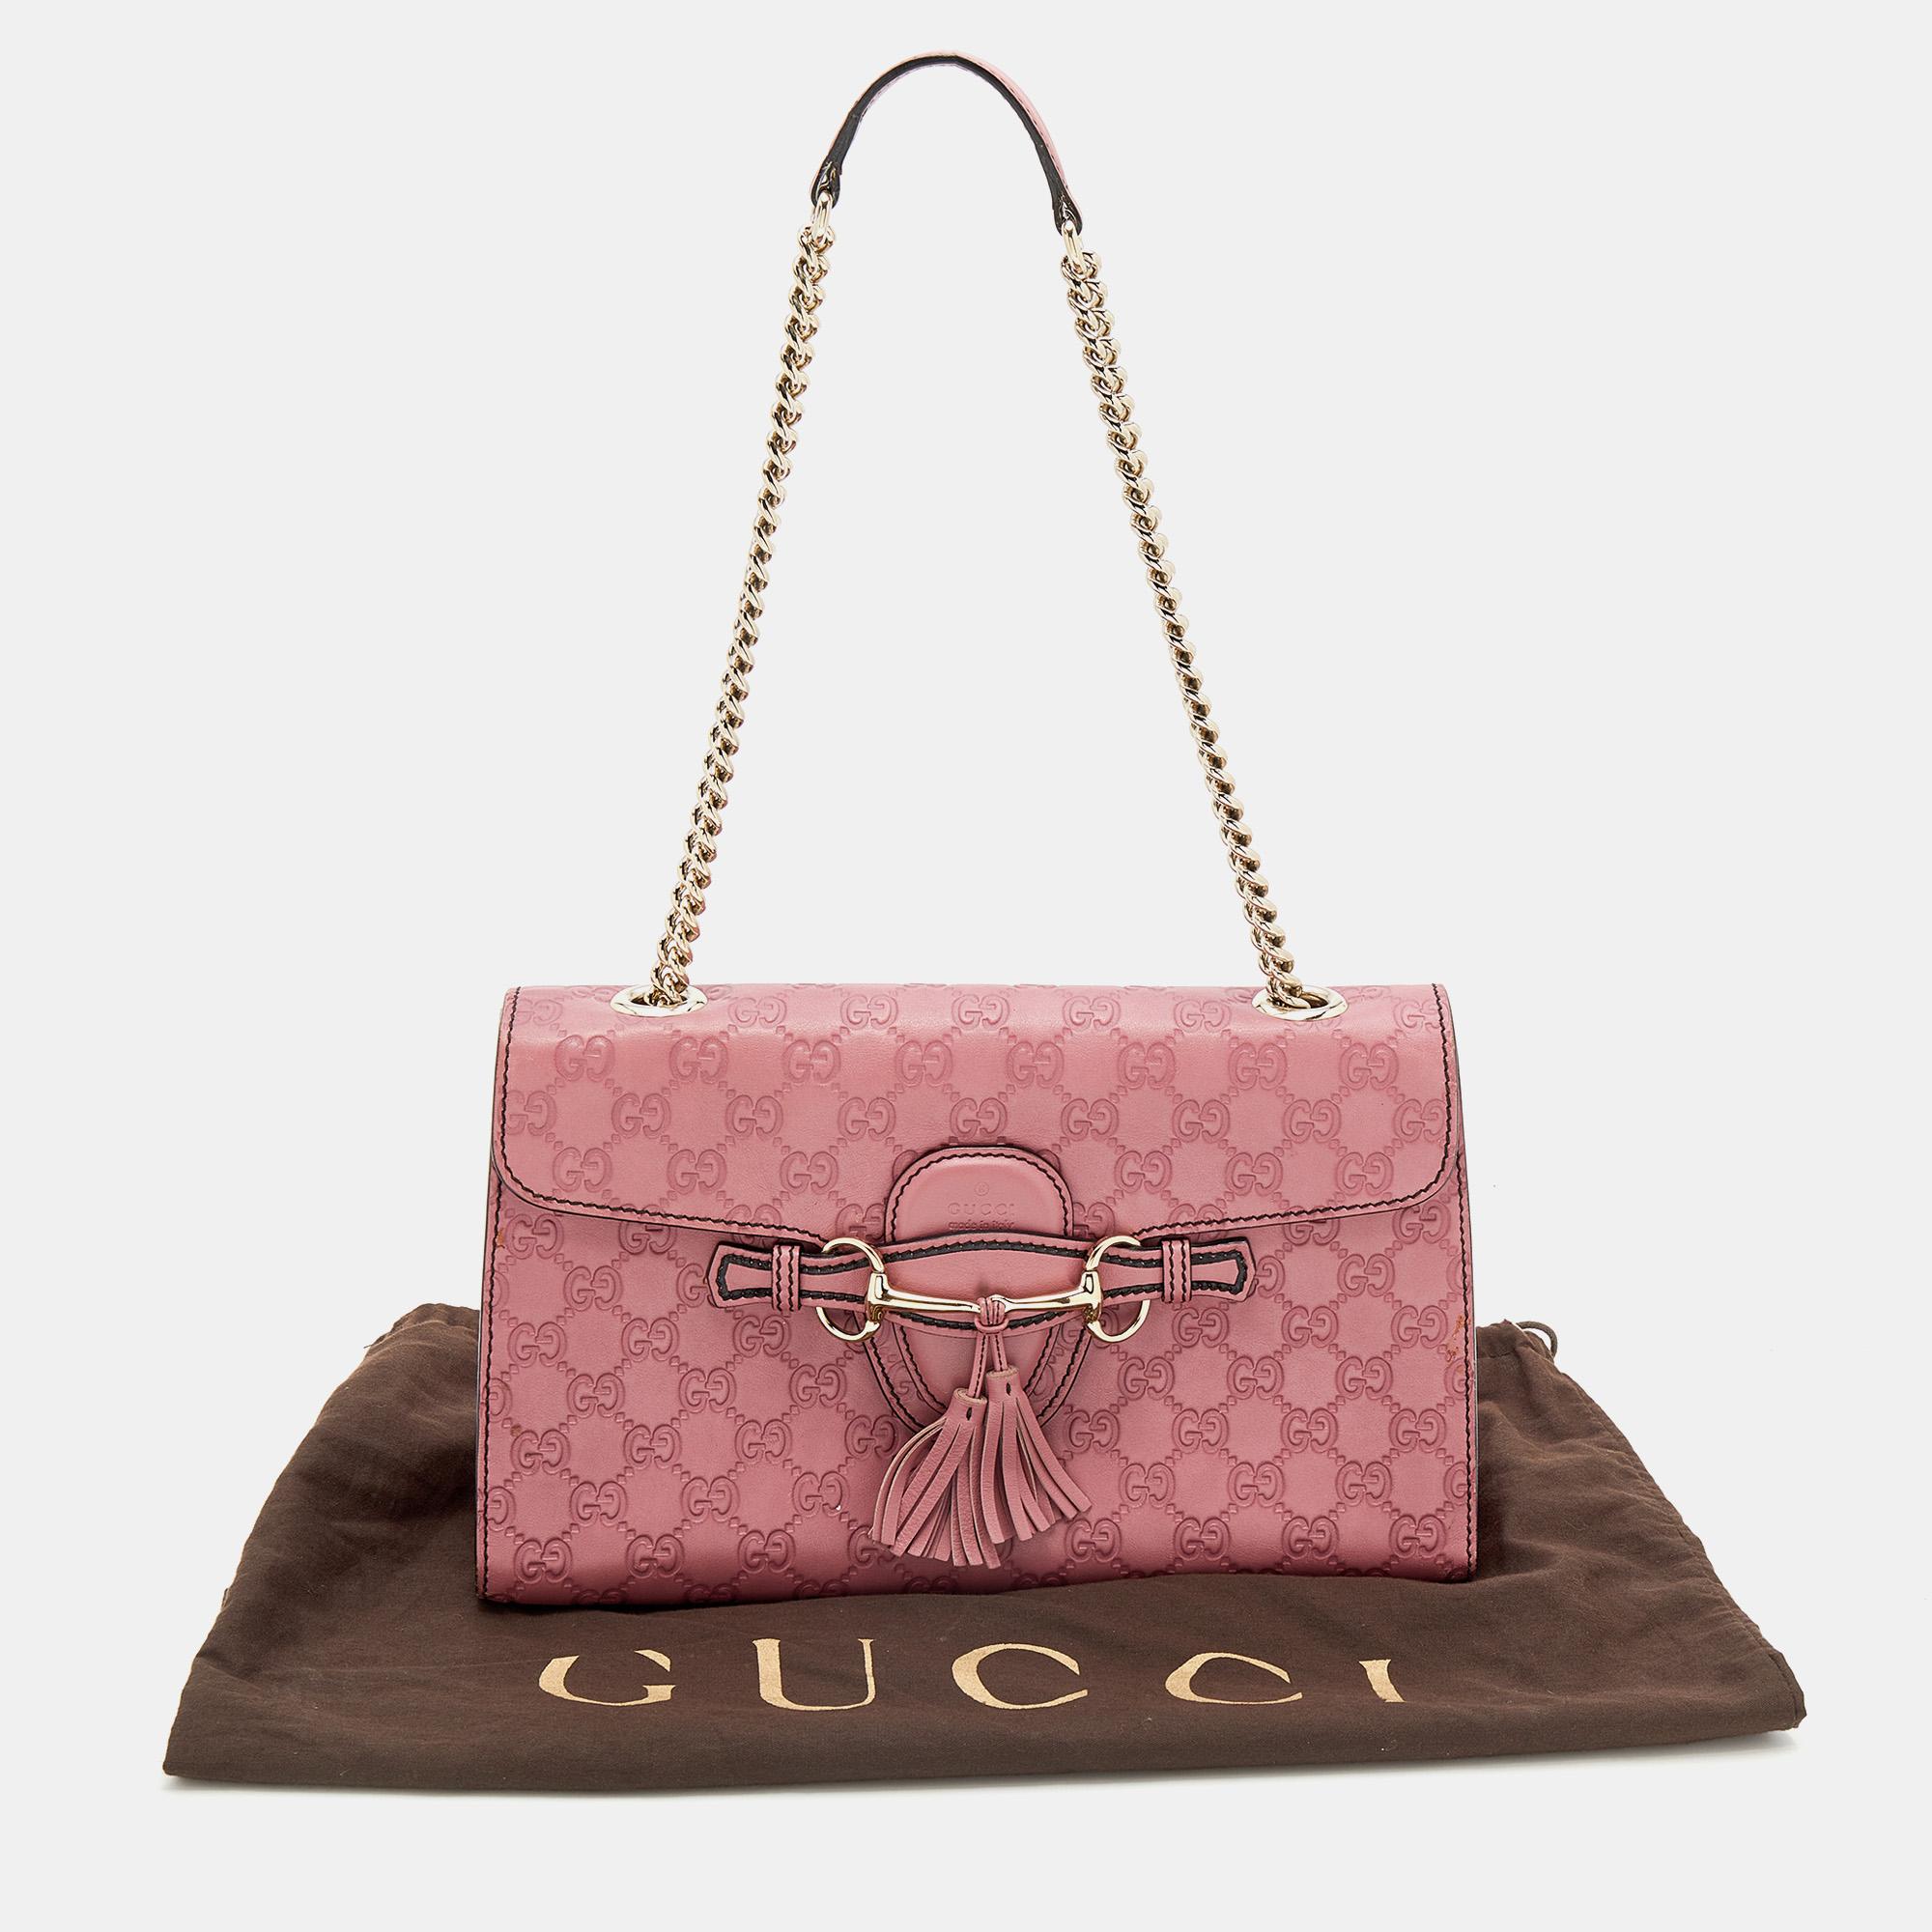 Gucci Pink Guccissima Leather Emily Chain Shoulder Bag 5